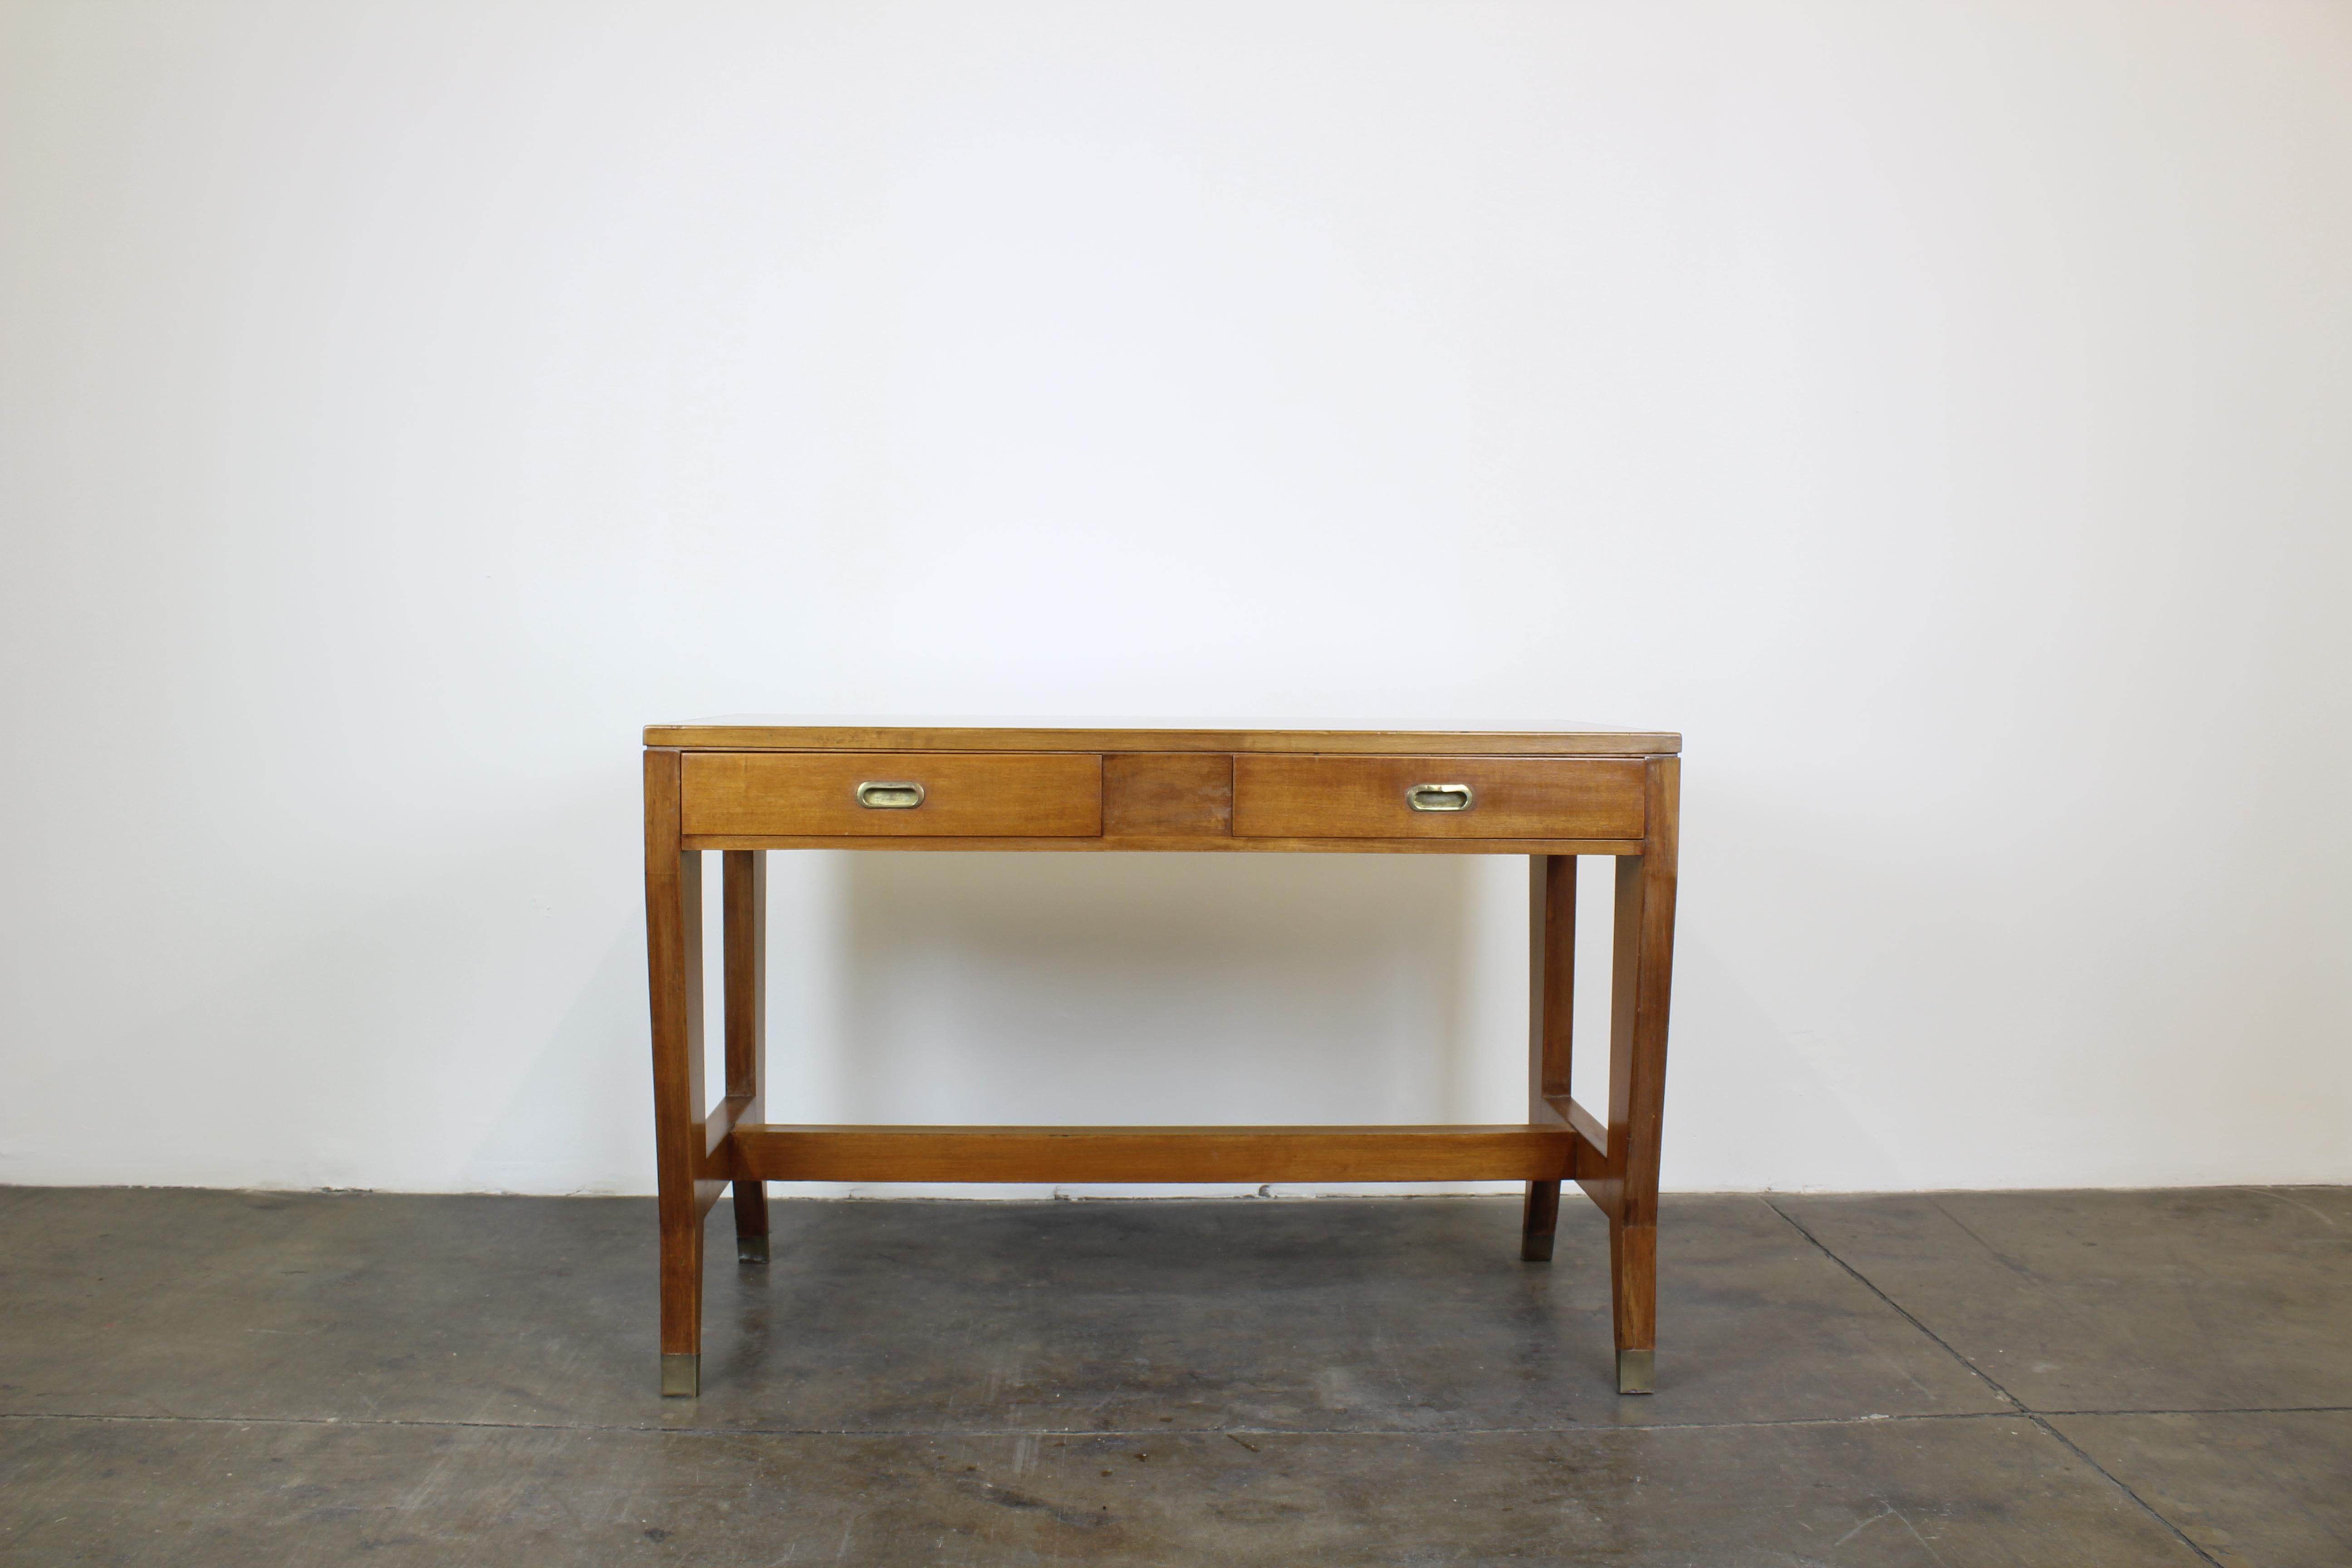 Mid-Century Modern Gio Ponti Desk in Walnut and Laminate for BNL by Schirolli 1950s, Italy